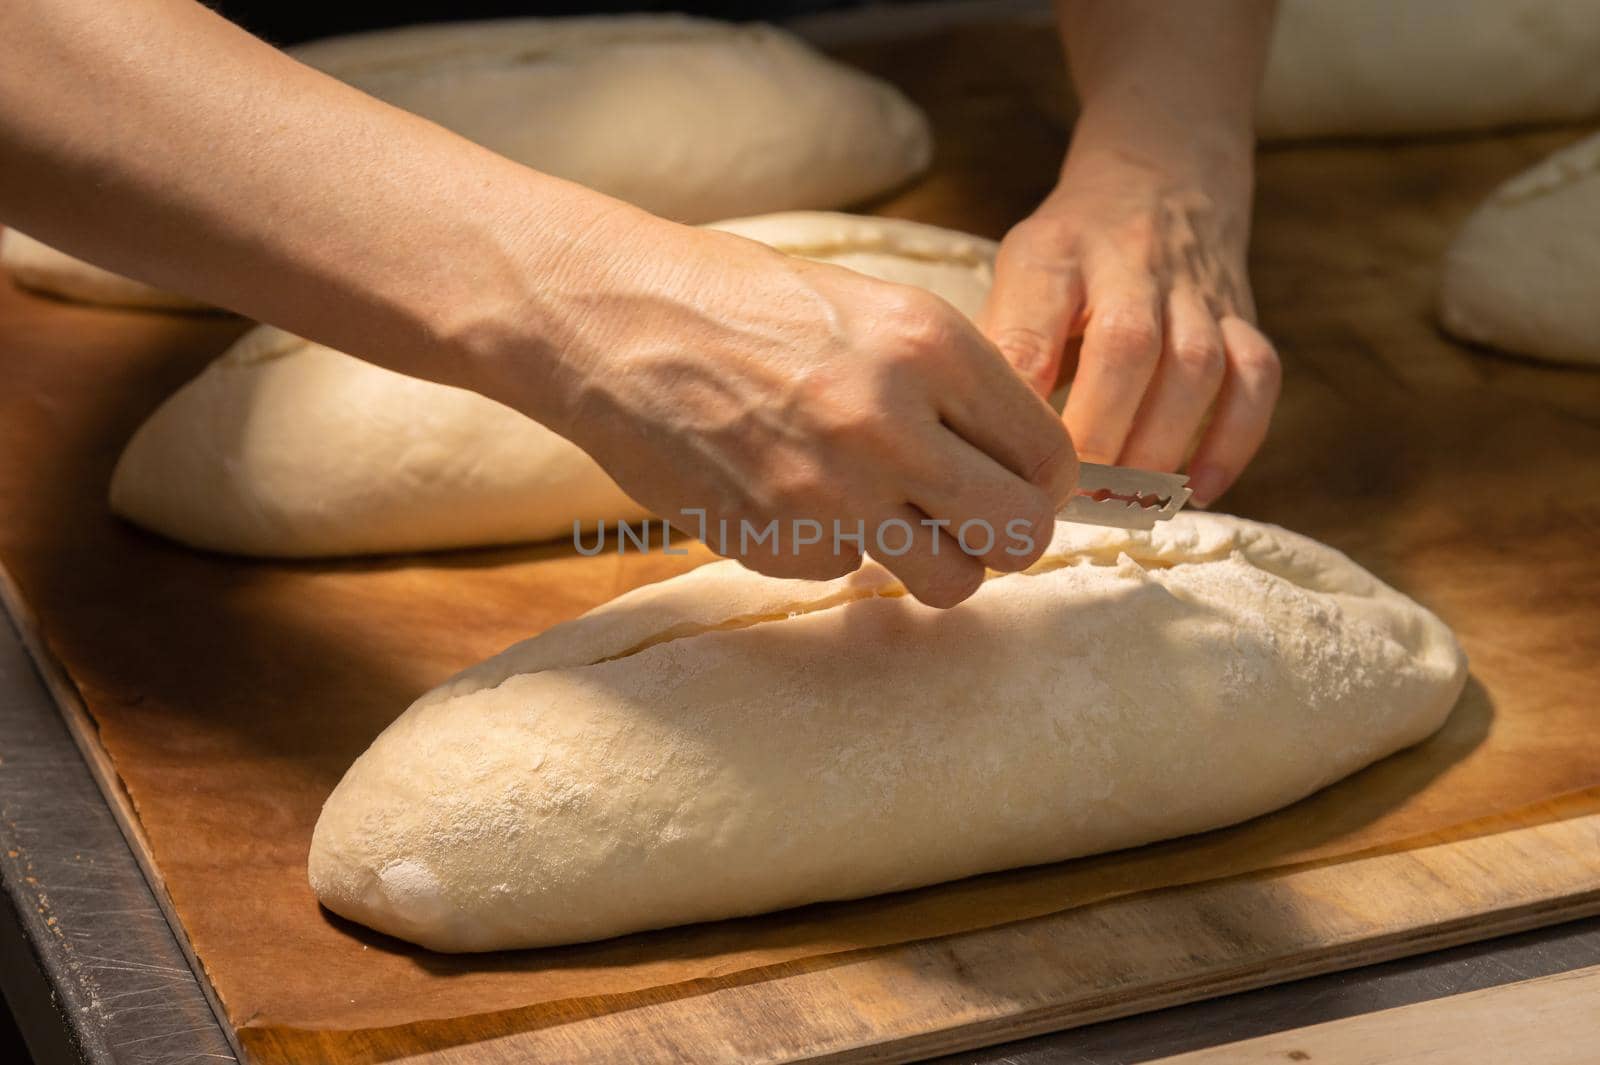 Close-up of a baker's female hands cutting a loaf of dough into a loaf of bread with a blade before baking in the oven. Craft craft bread production.